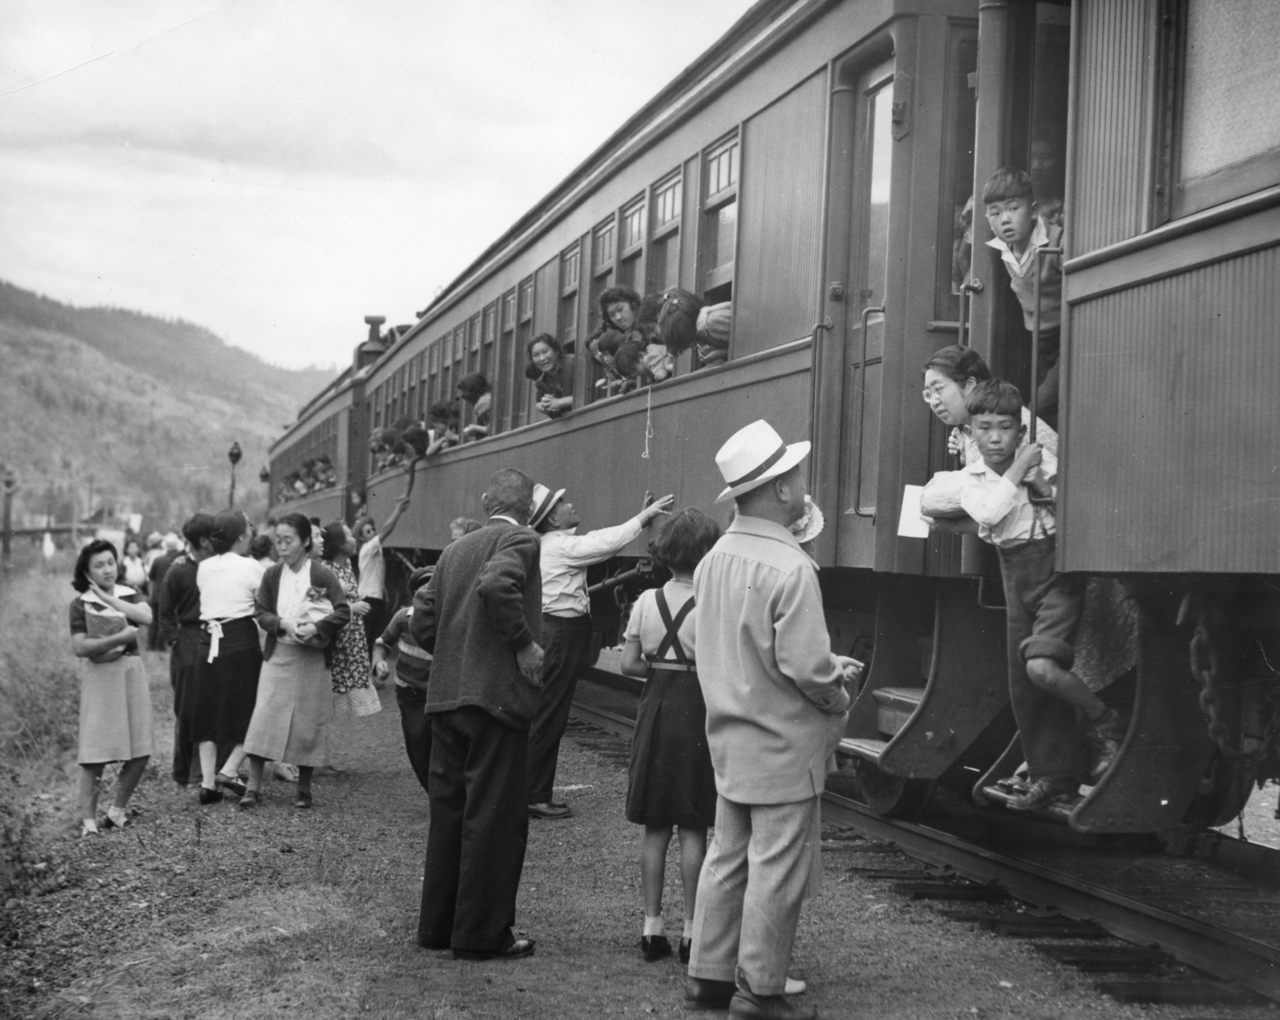 Displaced Japanese Canadians leaving the Vancouver area (possibly Slocan Valley) after being prohibited by law from entering a “protected area” within 100 miles of the coast. The woman on the left in this Leonard Frank photograph holding the book is Nobuko Morimoto, the woman in dark cardigan is Tei Terashita, and the young woman leaning out of train is identified as Kazuyo Kawabata.